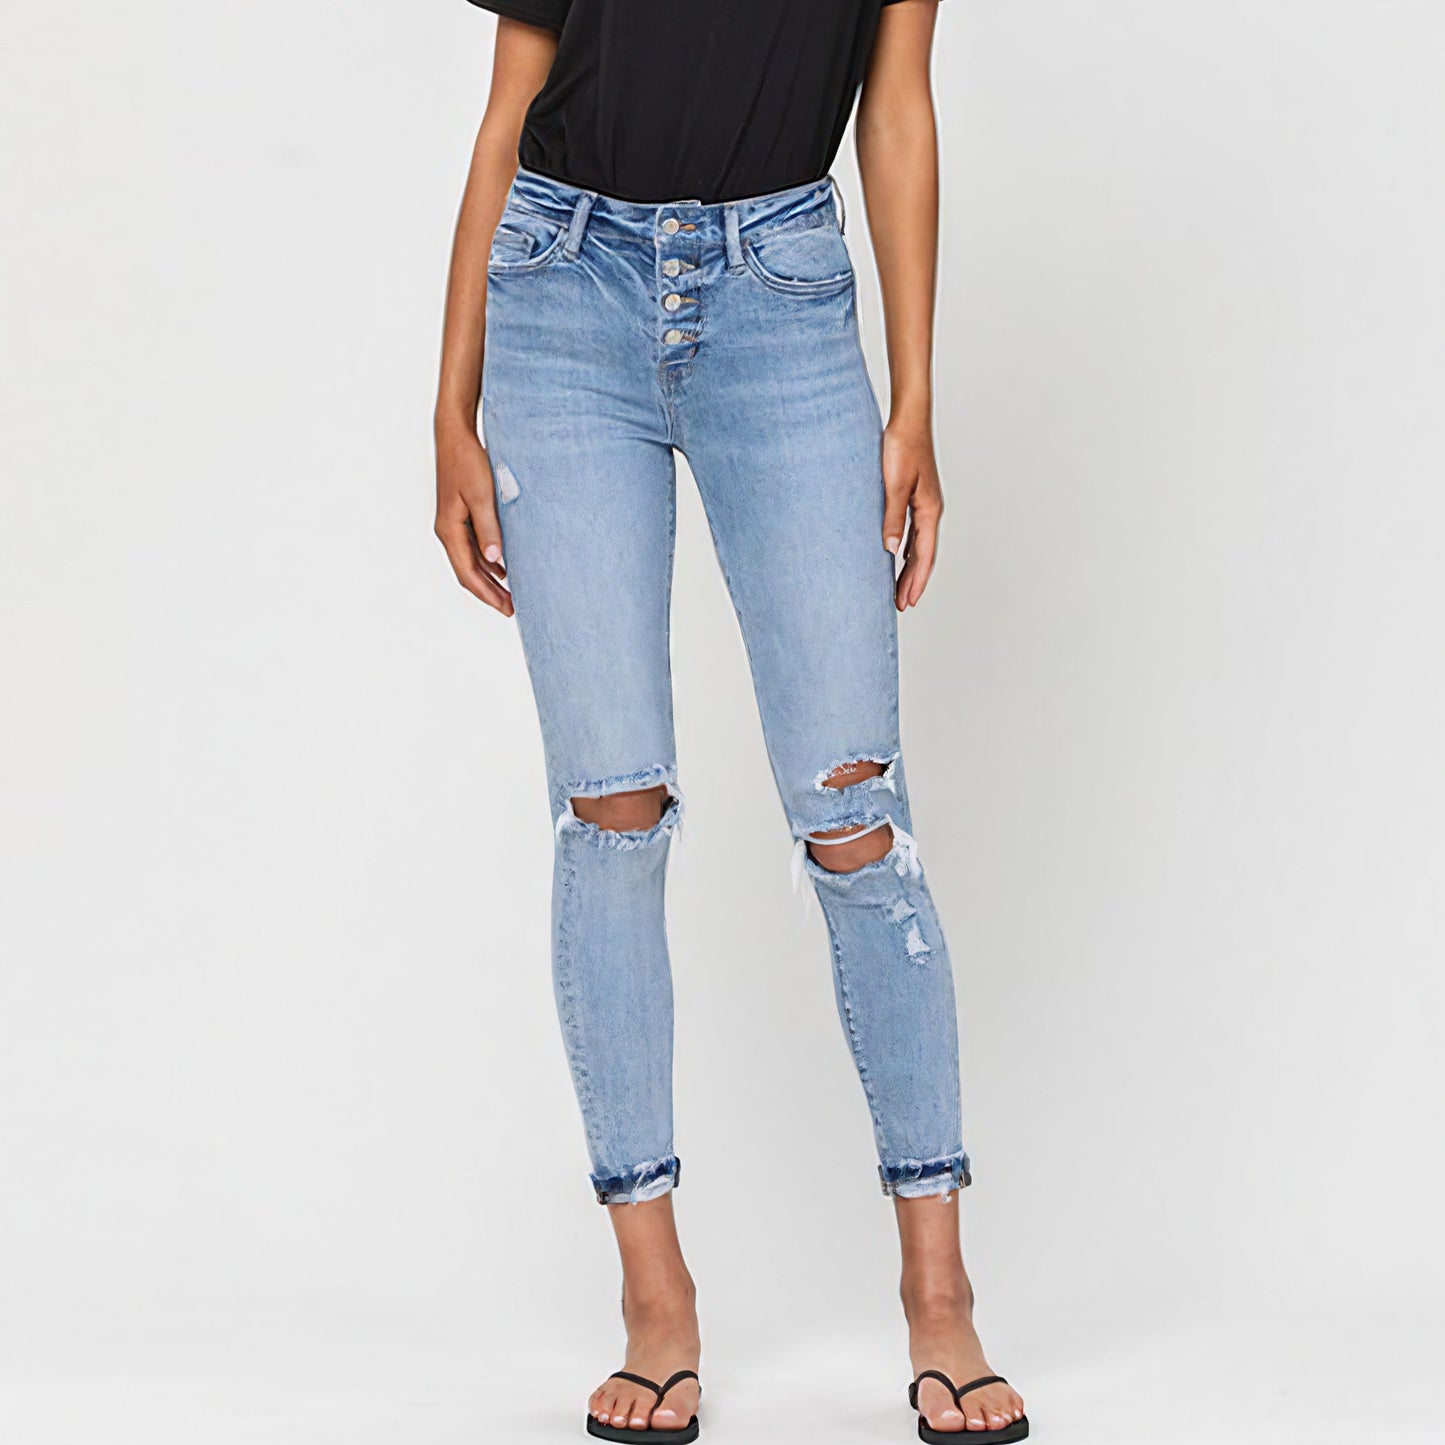 High Rise Button Up Skinny Jeans